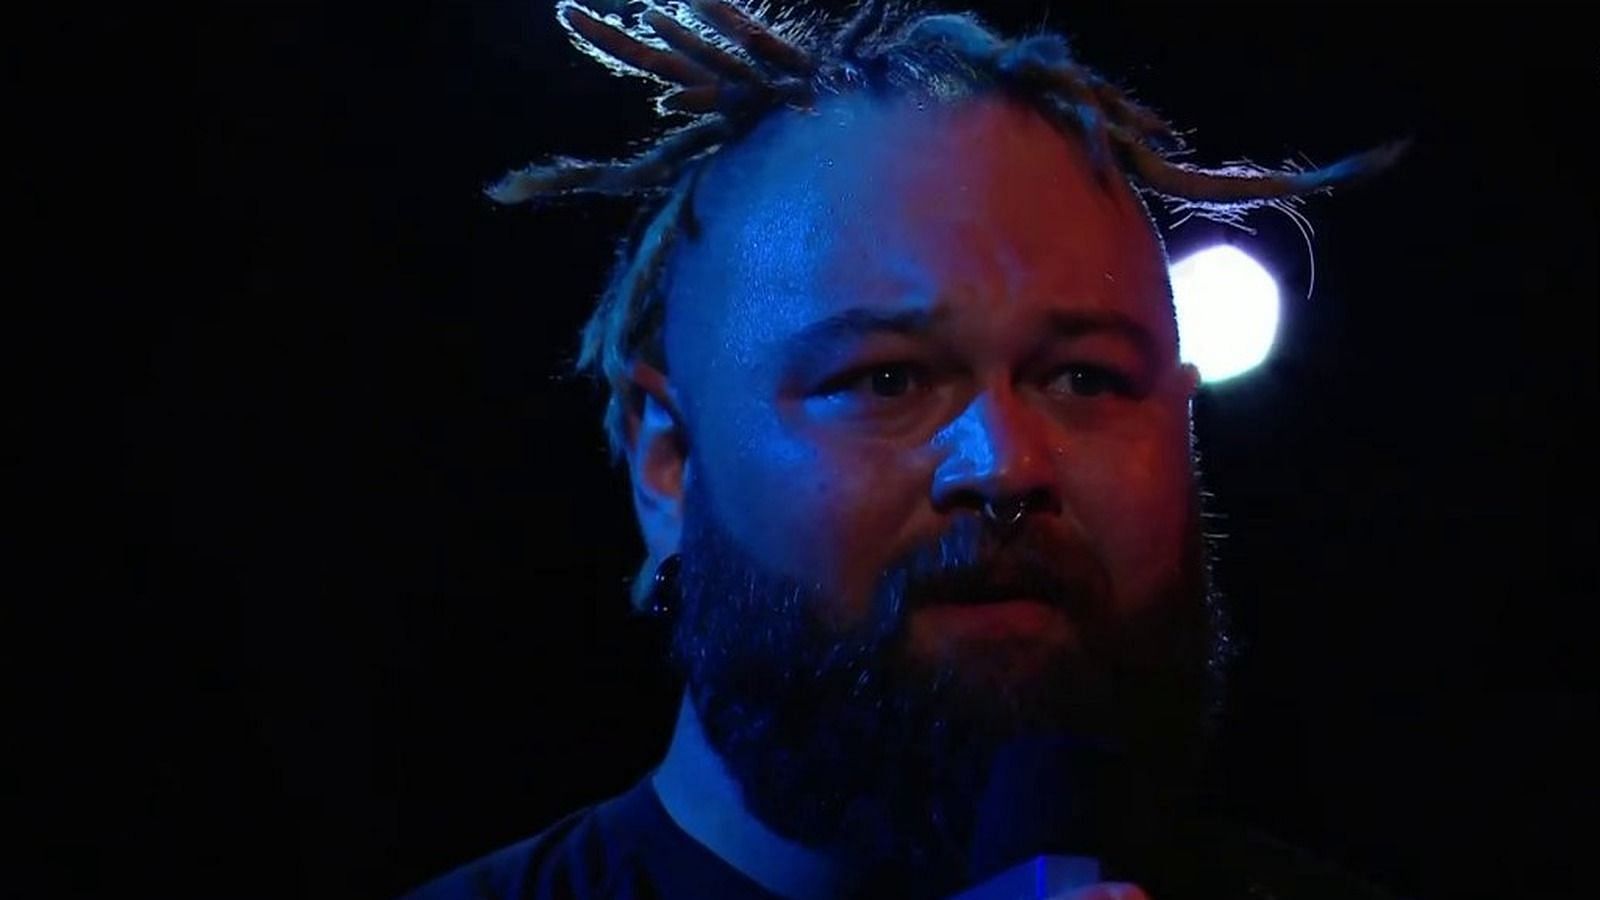 Bray Wyatt returned to WWE at the Extreme Rules 2022 show